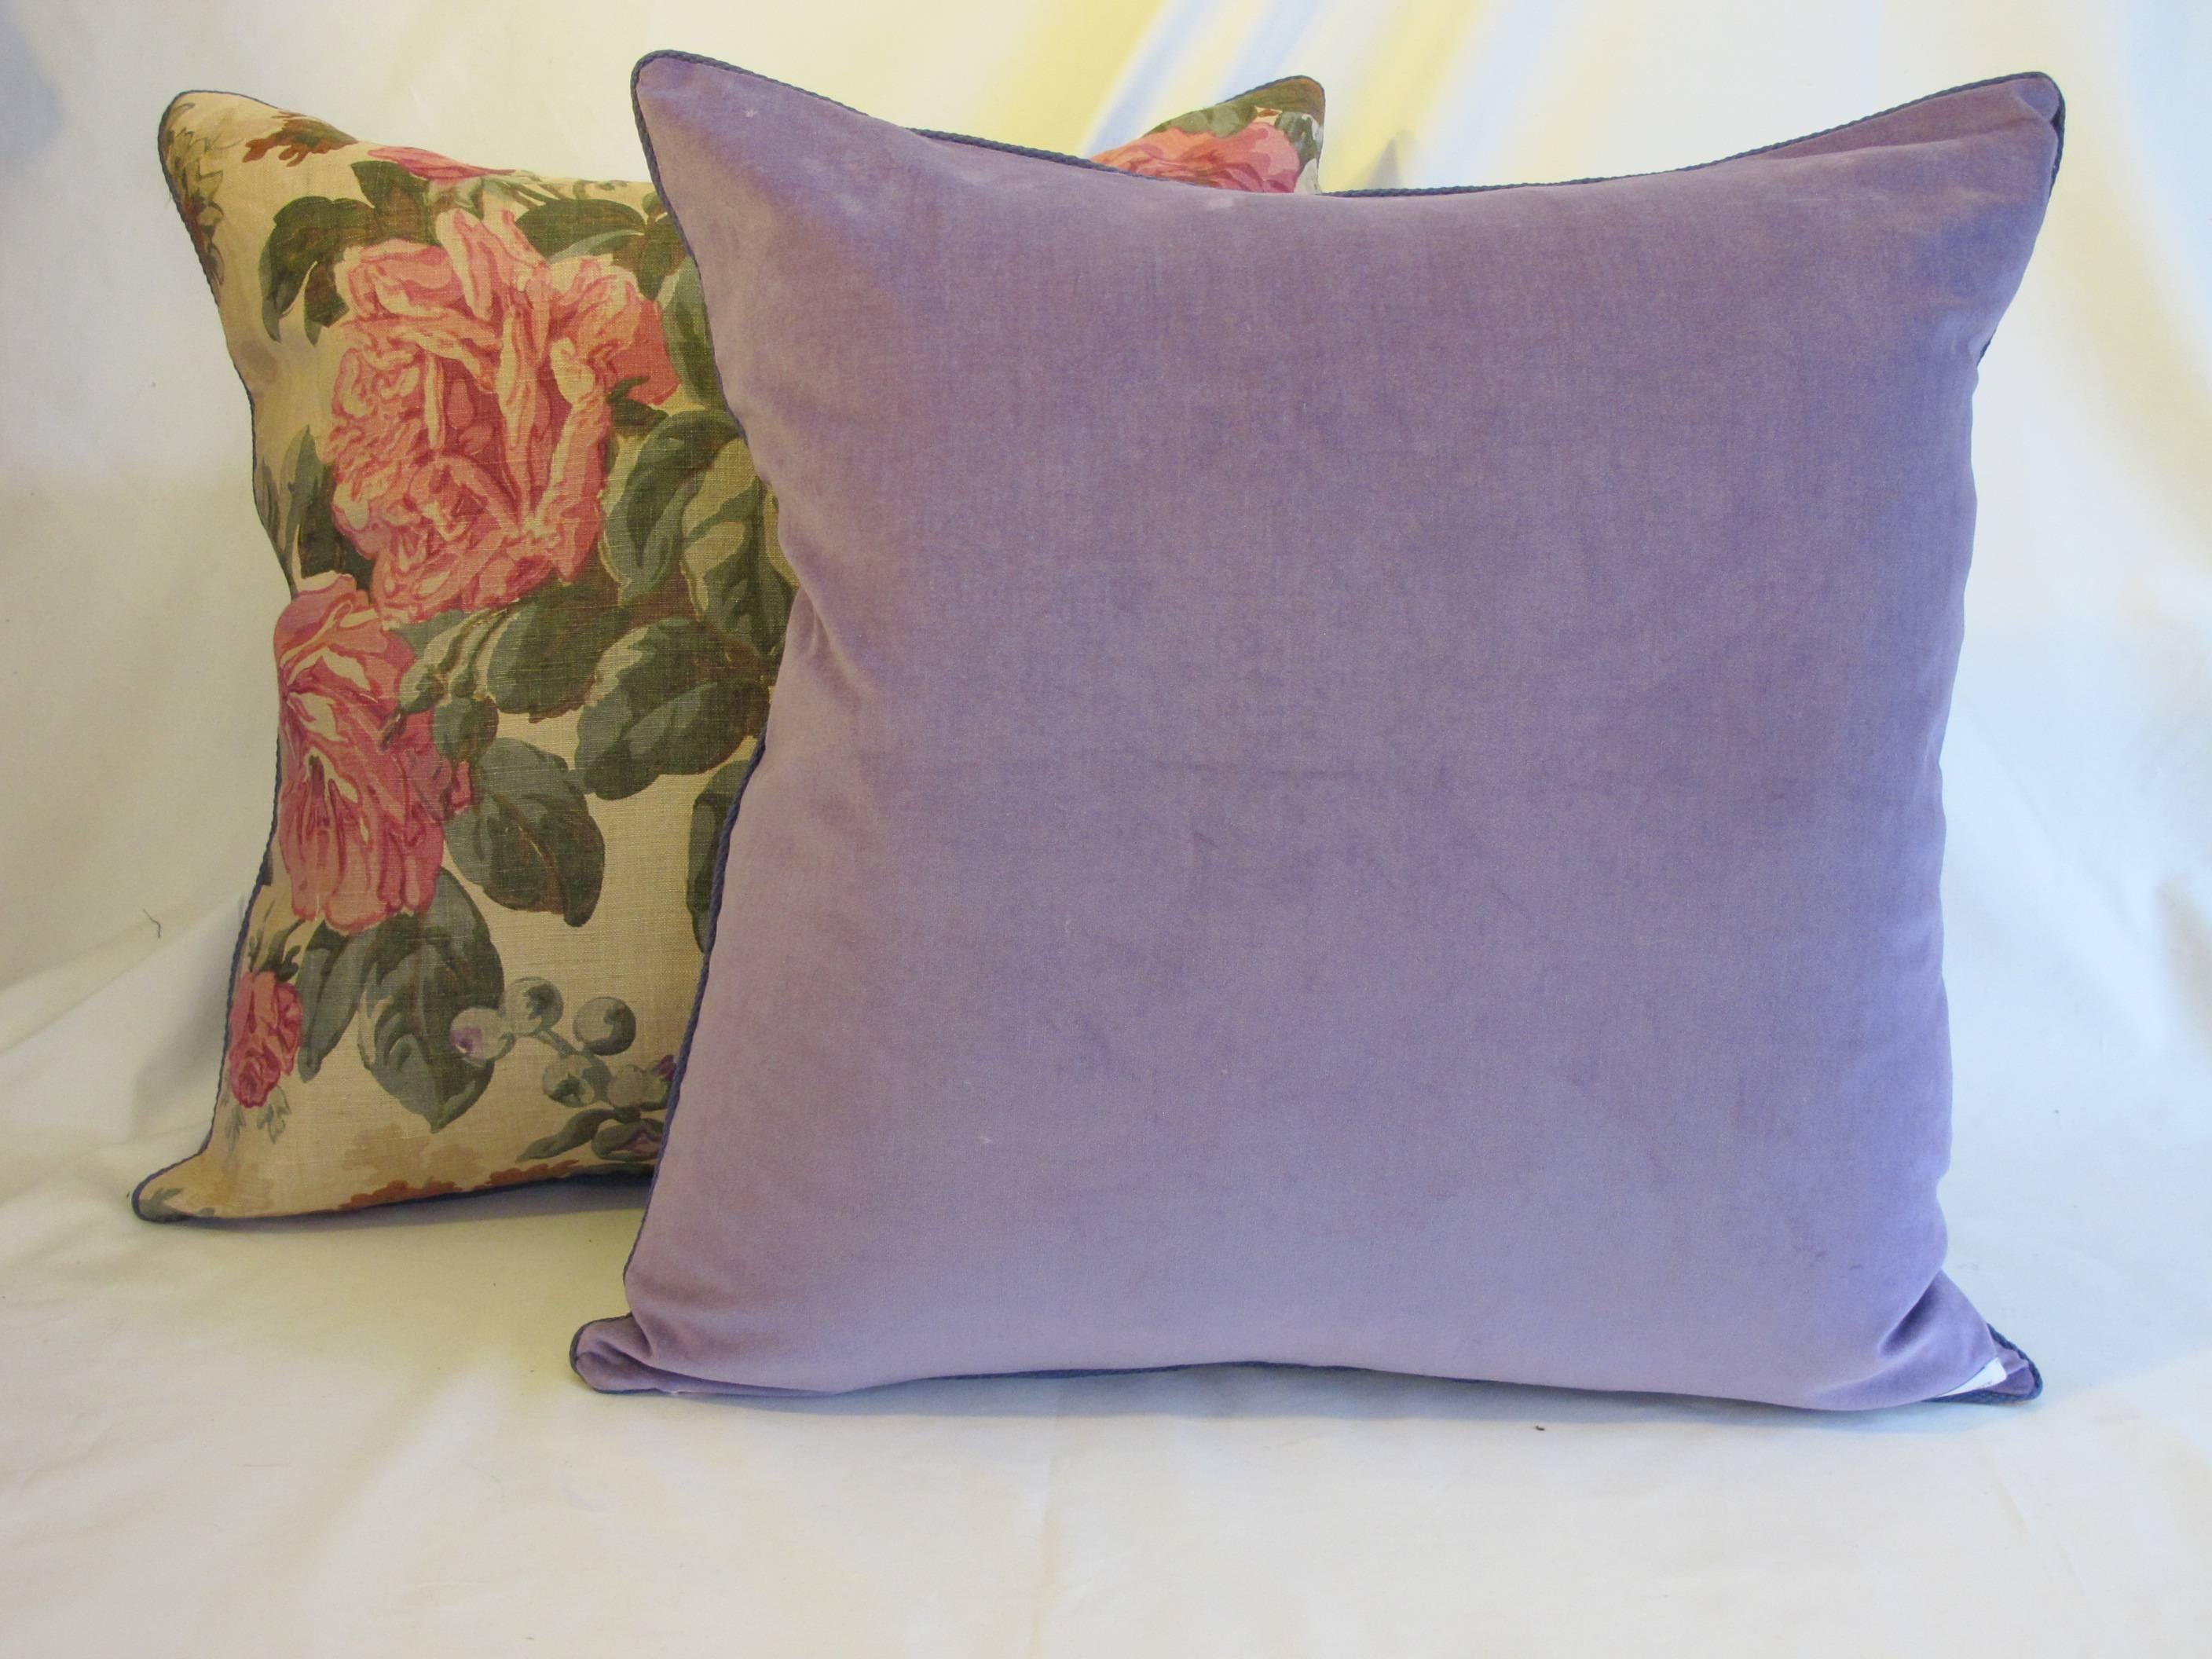 A pair of lovely pillows made from a circa 1920s floral printed linen in glorious spring colors, backed with a coordinating cotton velvet, with a hidden zipper closure, down inserts are included.